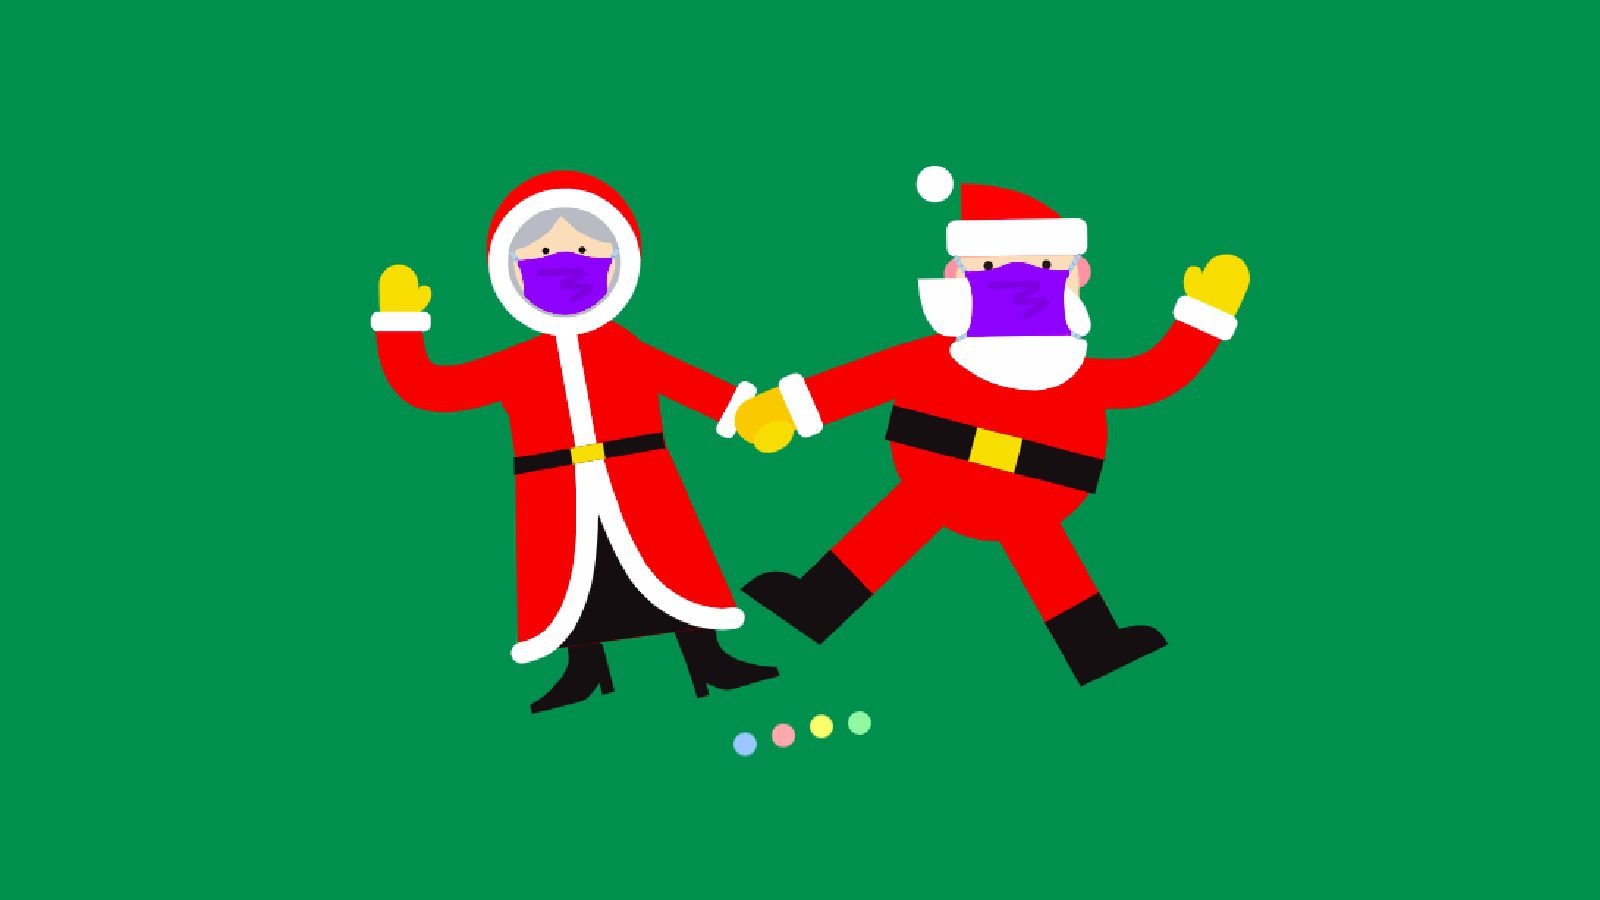 Google Santa Tracker unveiled annual Santa Tracking page for children